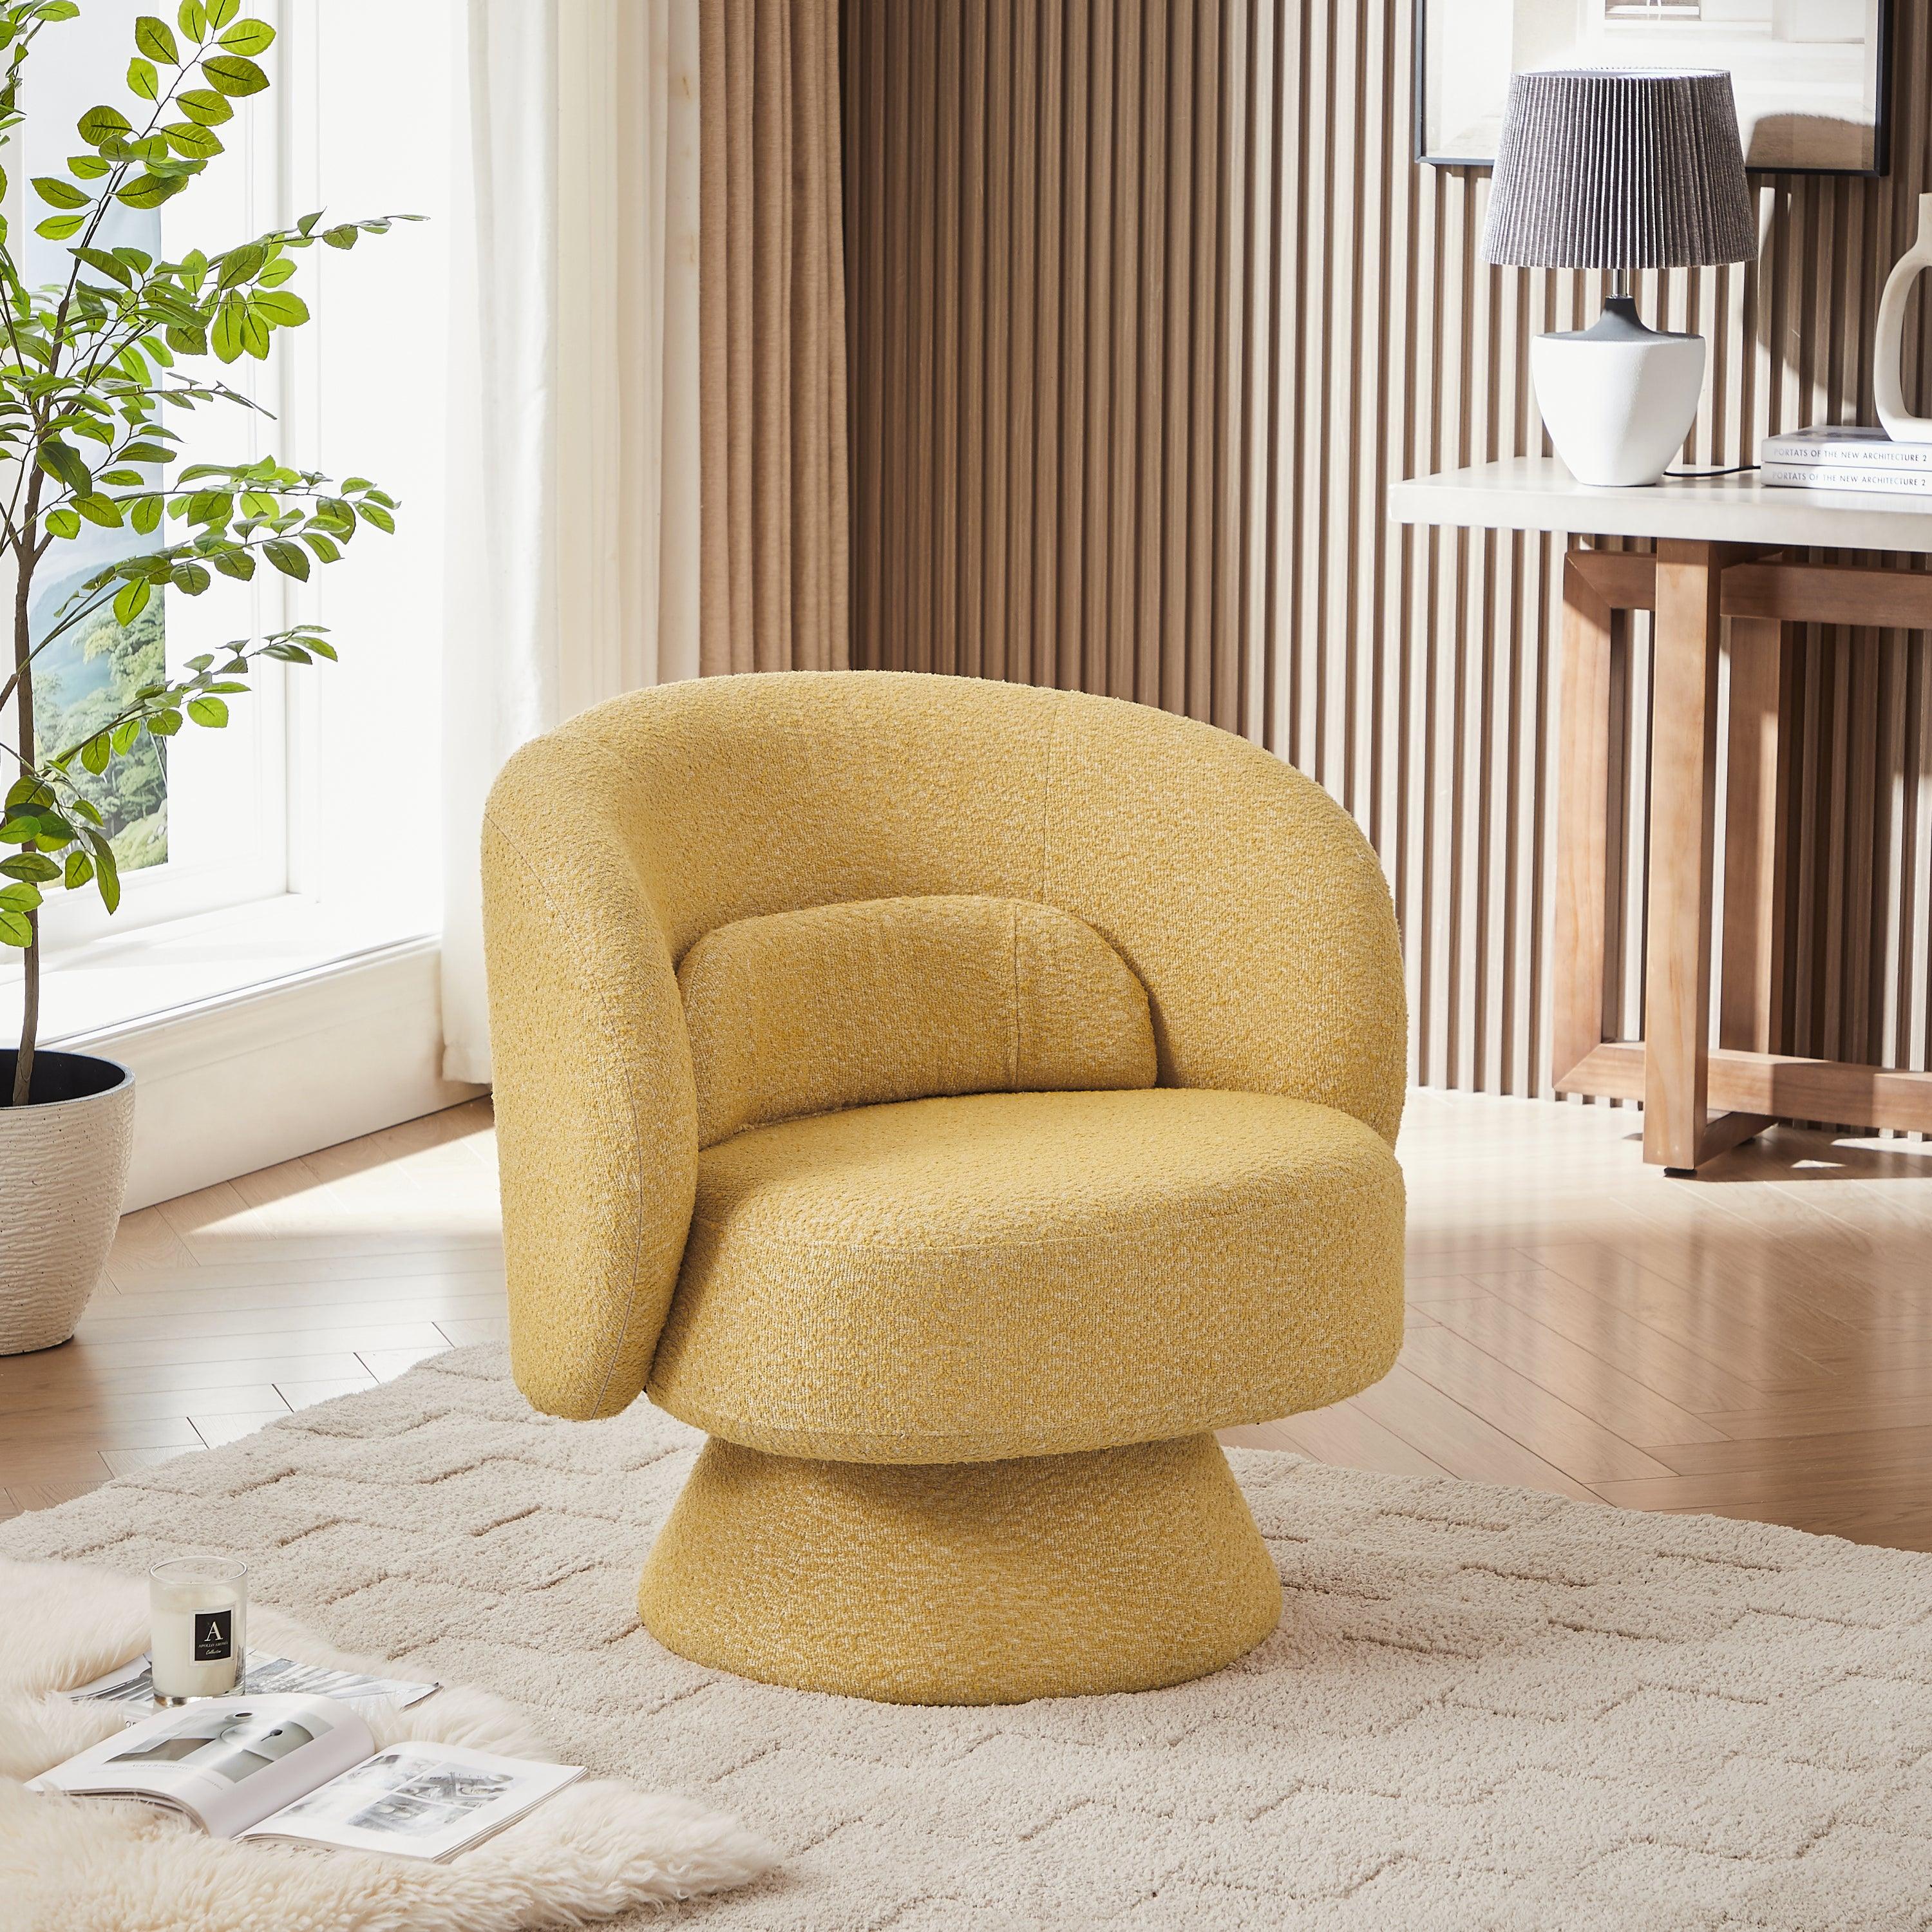 🆓🚛 360 Degree Swivel Sherpa Accent Chair Modern Style Barrel Chair With Toss Pillows for Home Office, Living Room, Bedroom, Yellow